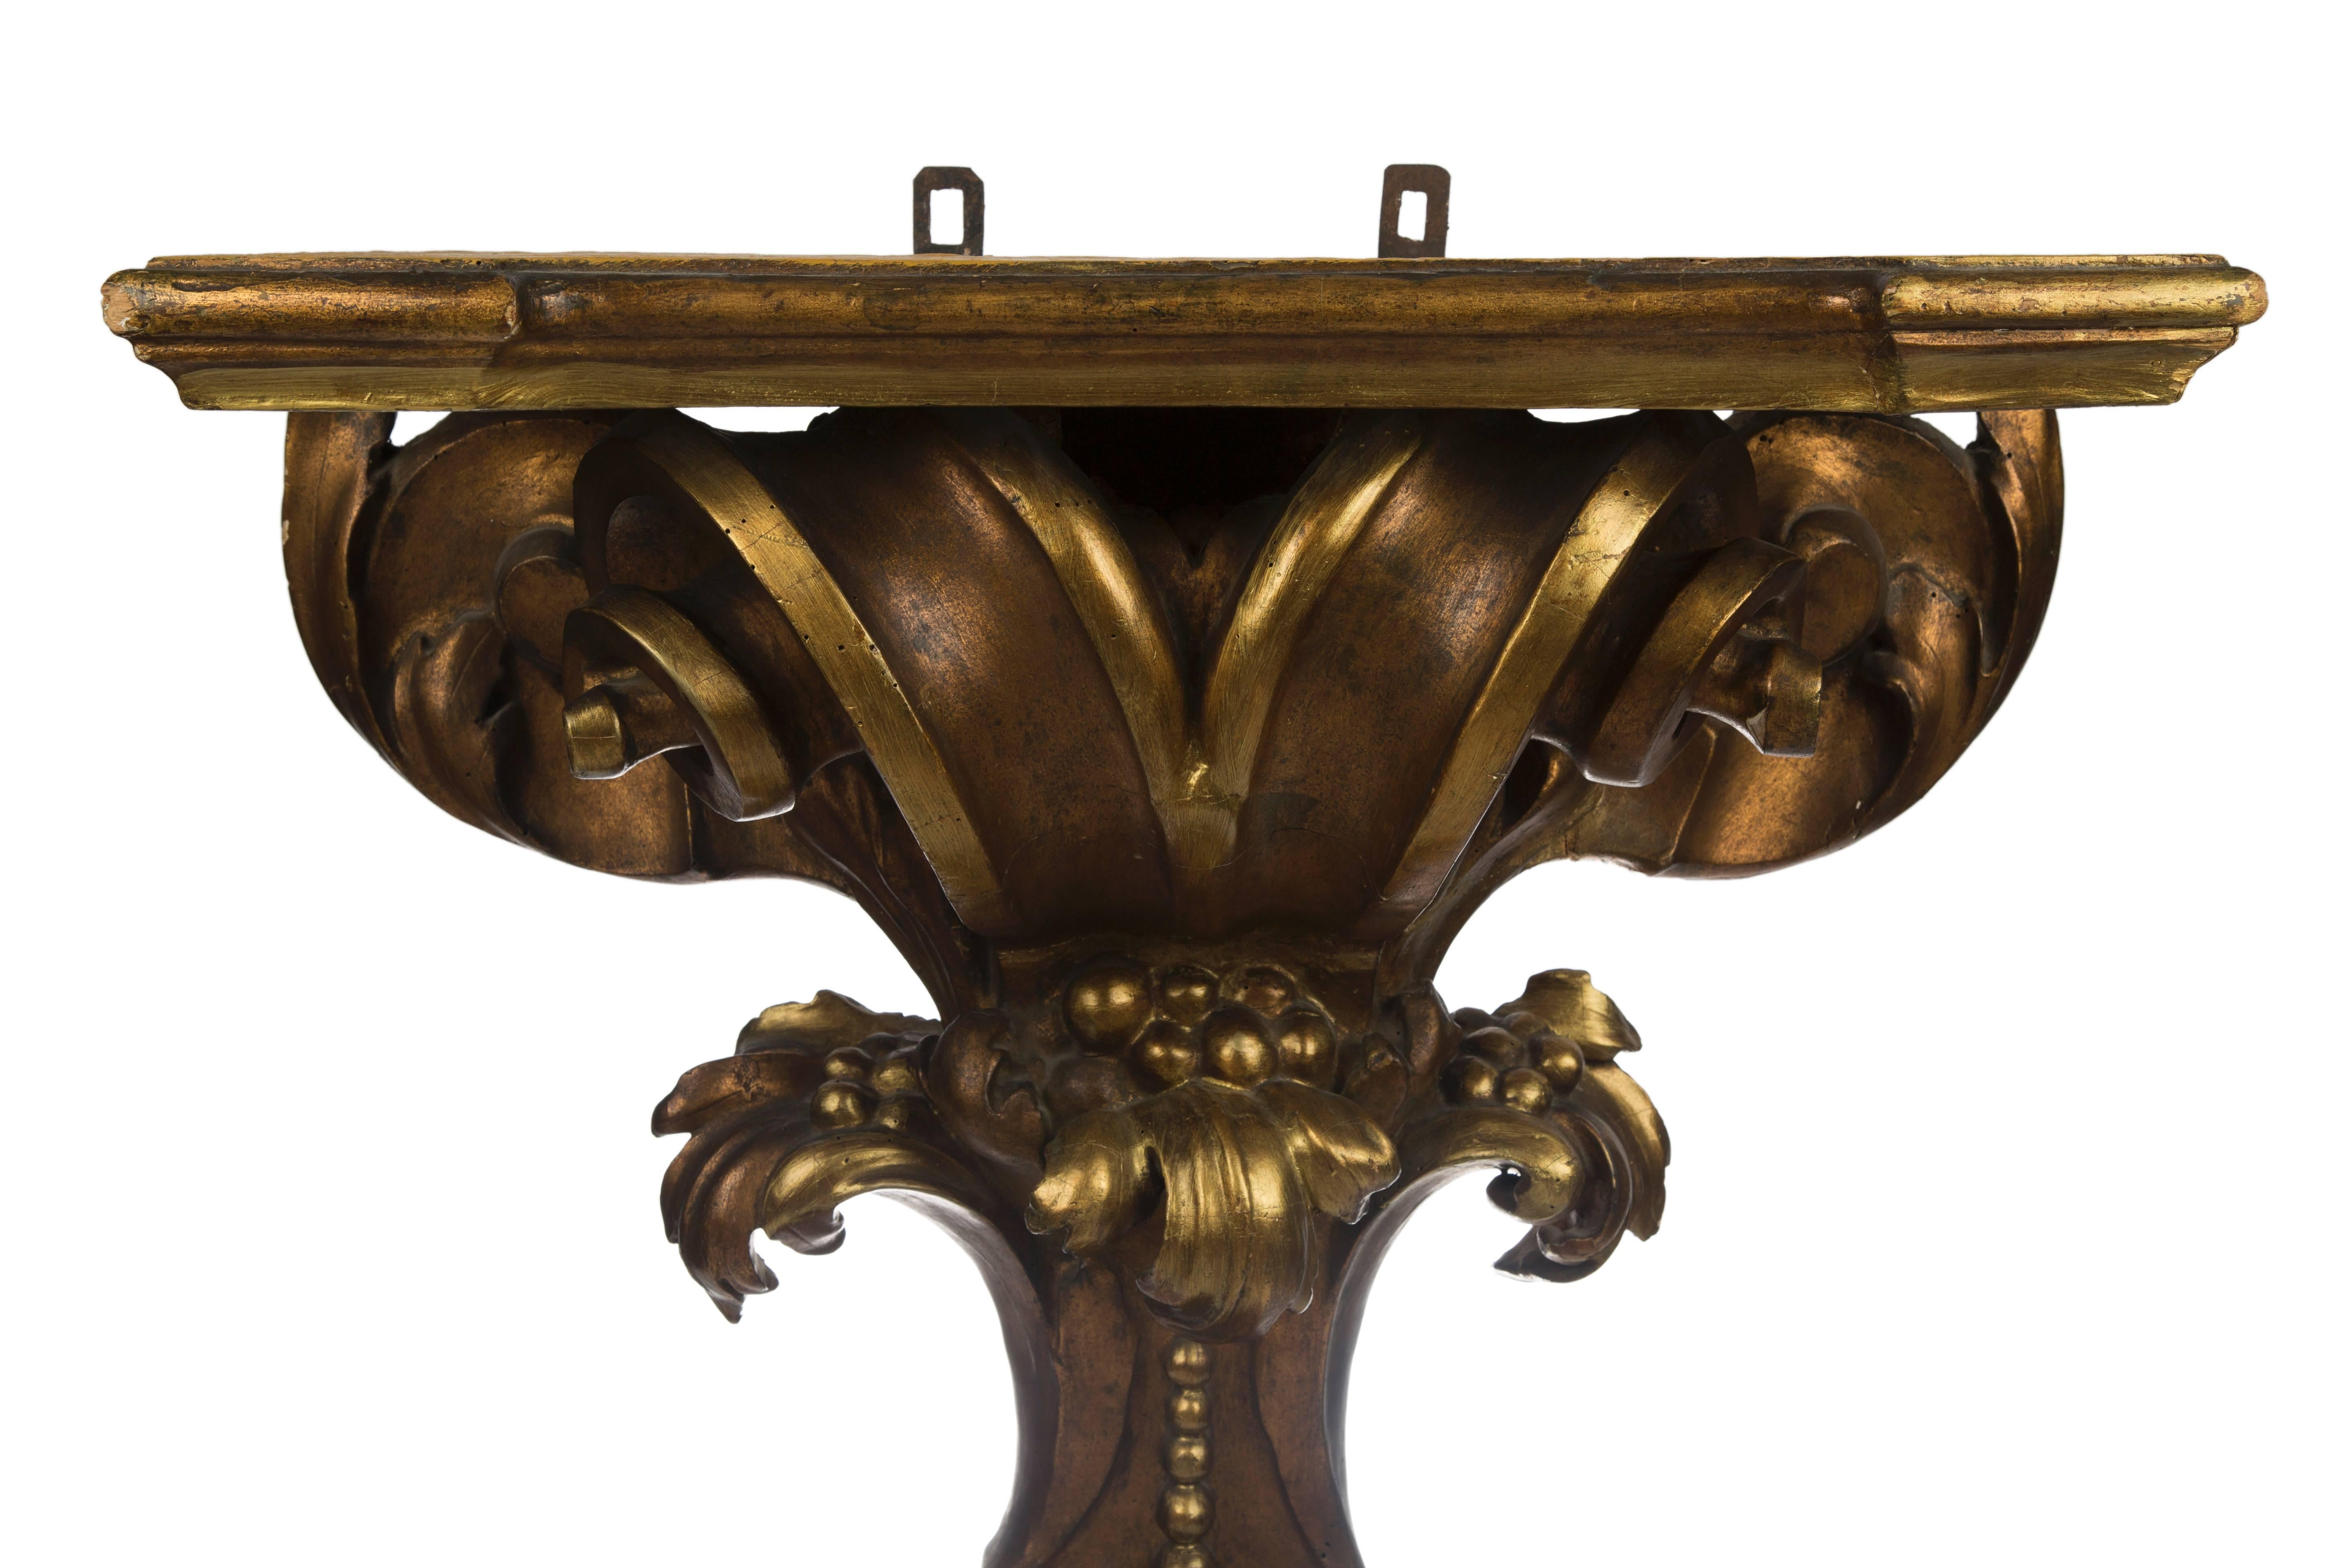 Ornate baroque carved giltwood console with foliage and scroll ornaments raised on shaped out-stepped plinth,
Italian, 18th century.